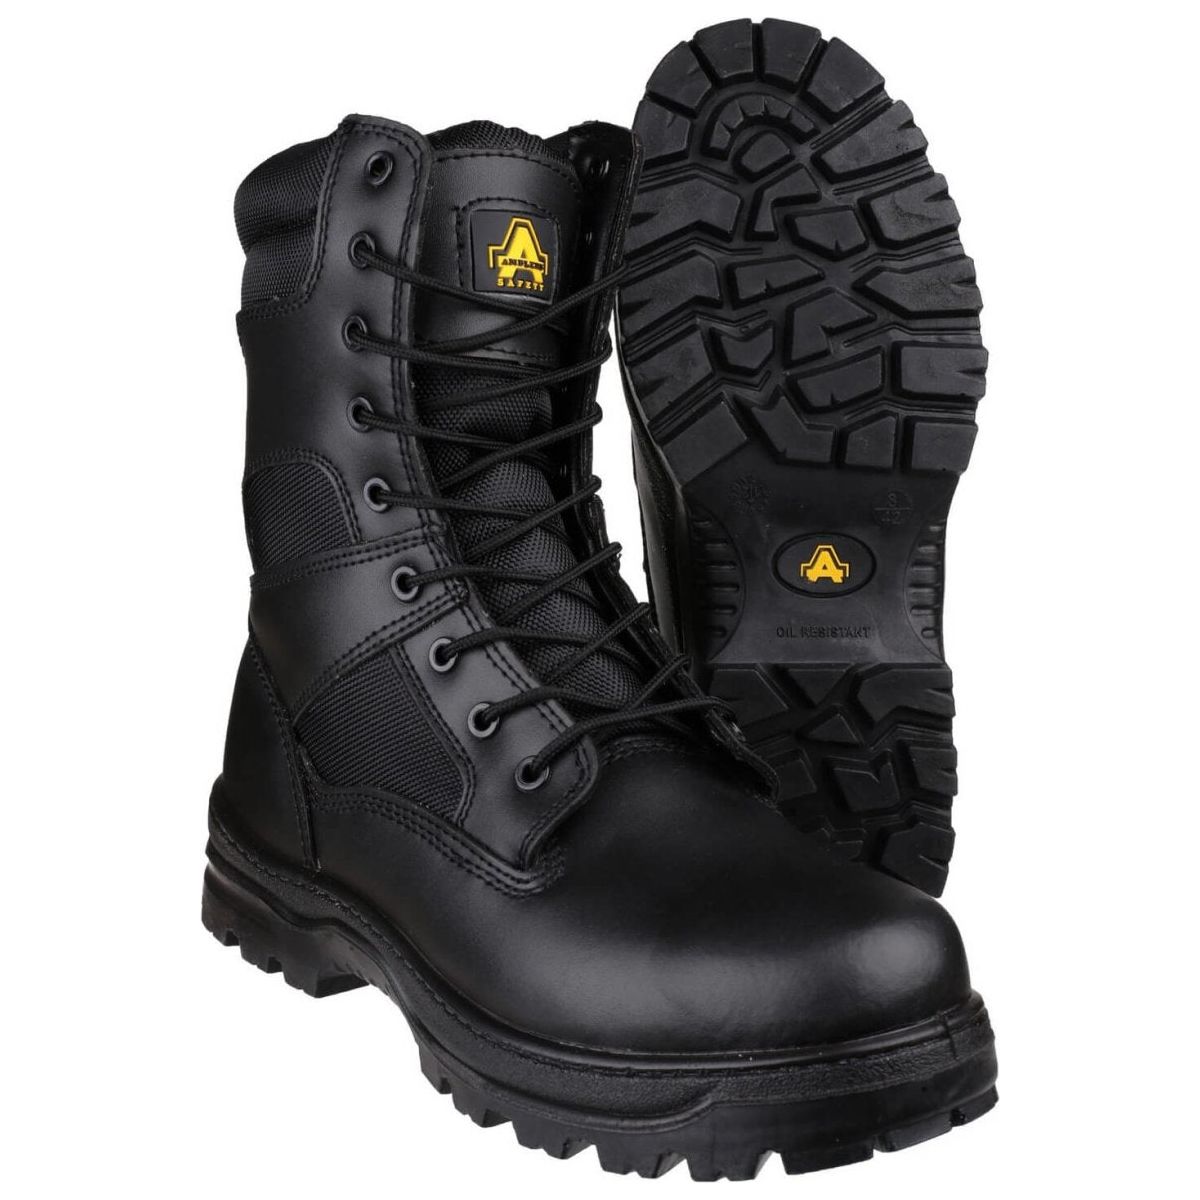 Amblers Fs009C Water Resistant High-Leg Safety Boots Womens - workweargurus.com